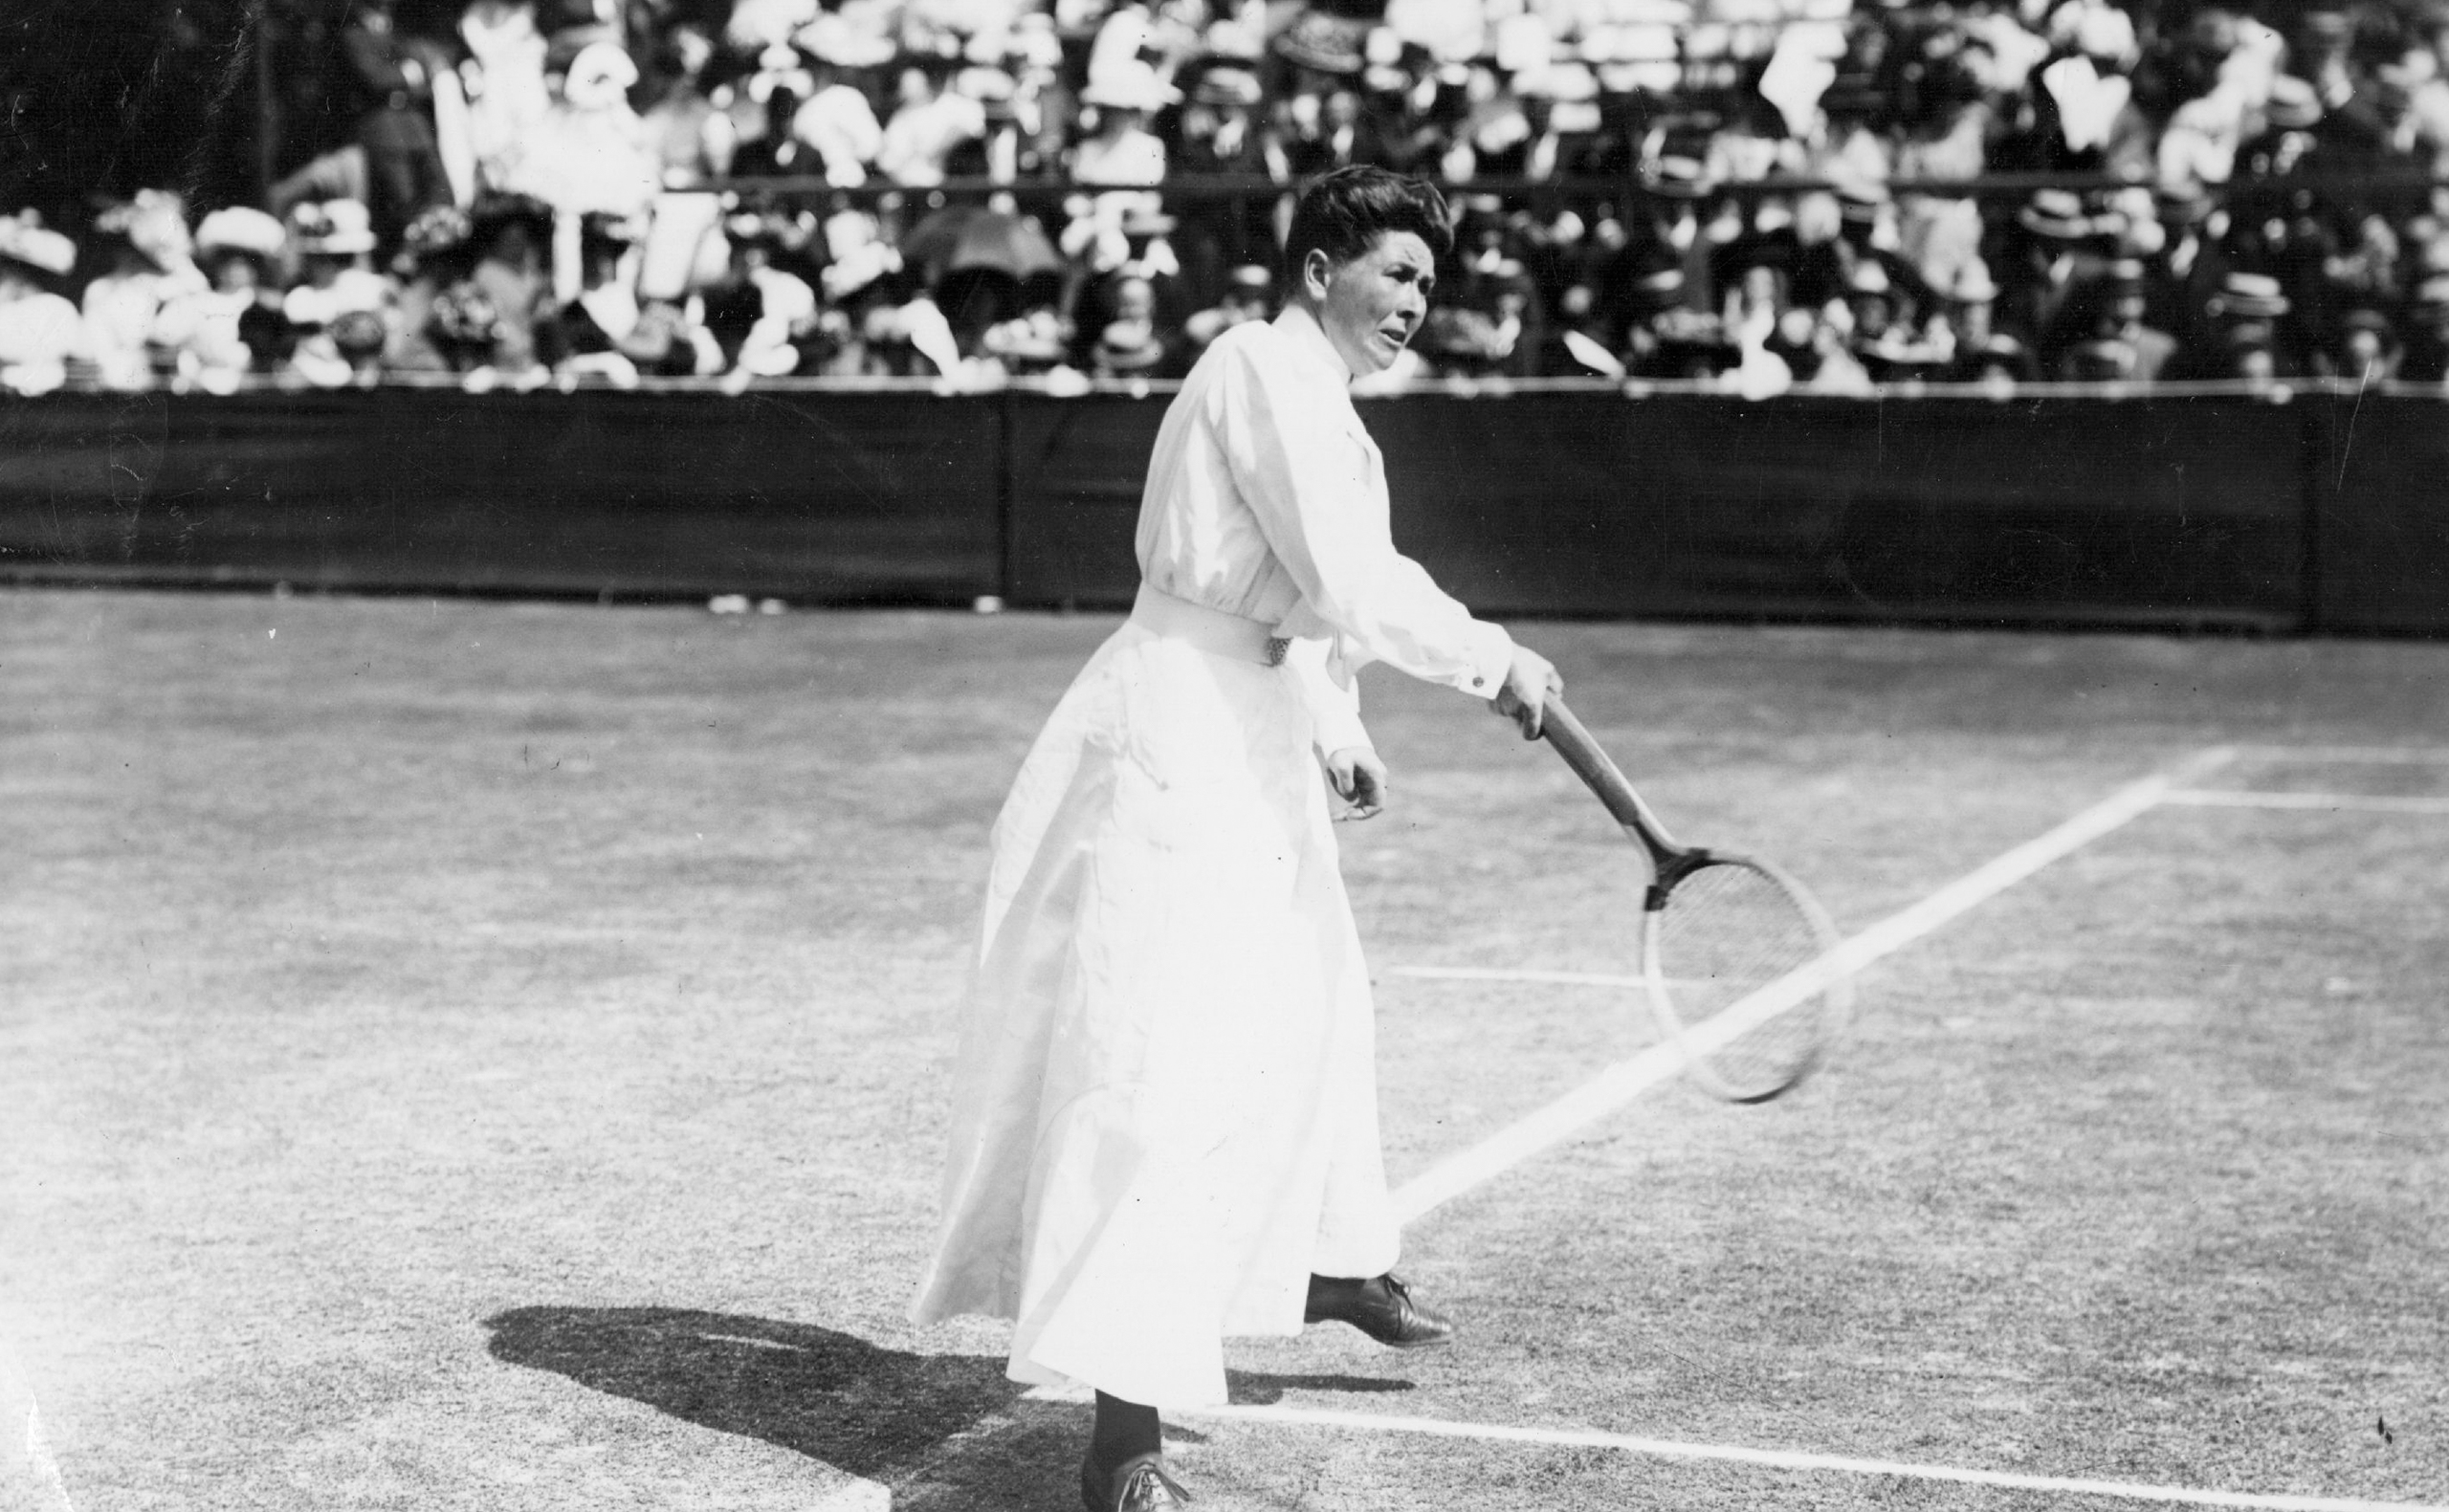 Wimbledon ladies’ singles champion Charlotte Sterry (nee Cooper) in action at Wimbledon